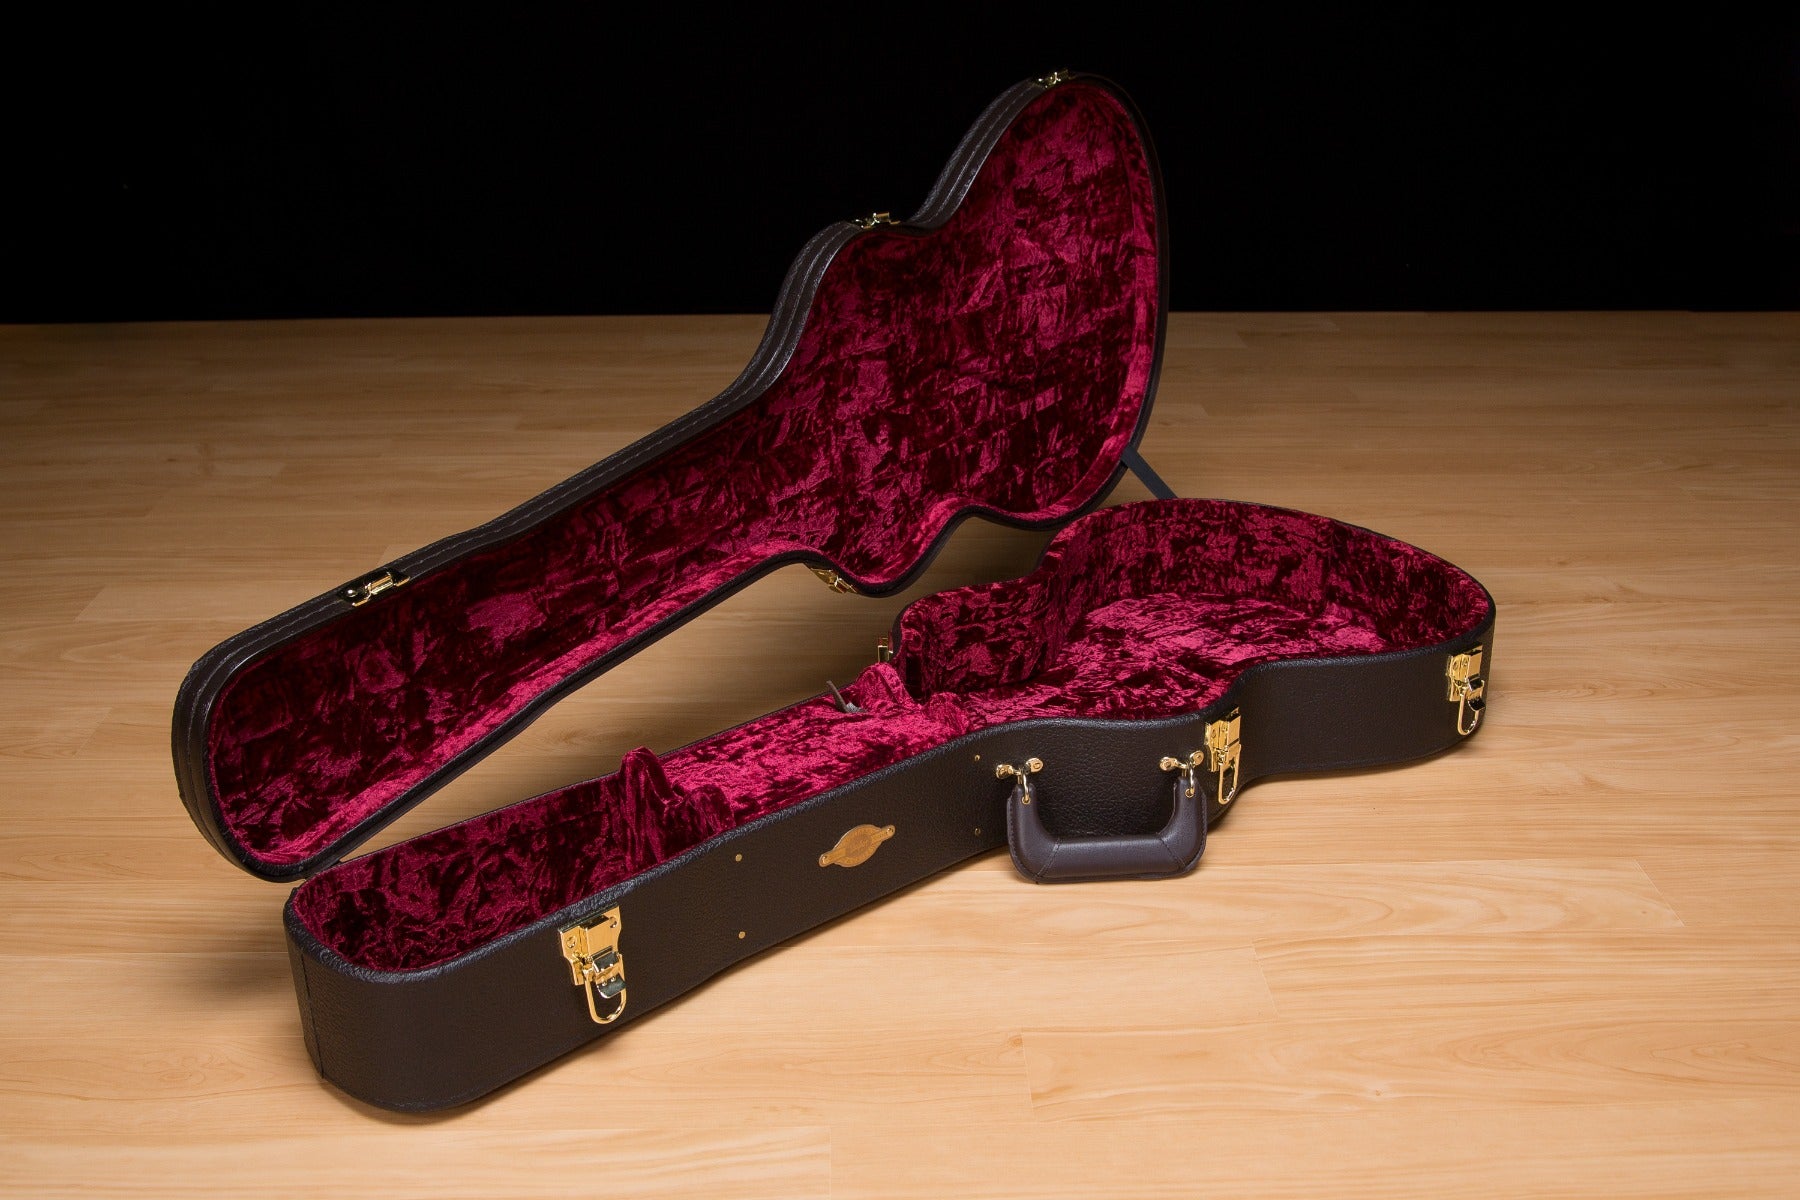 Included guitar case for the Taylor 214ce-BLK DLX Acoustic-Electric Guitar - Black view 2